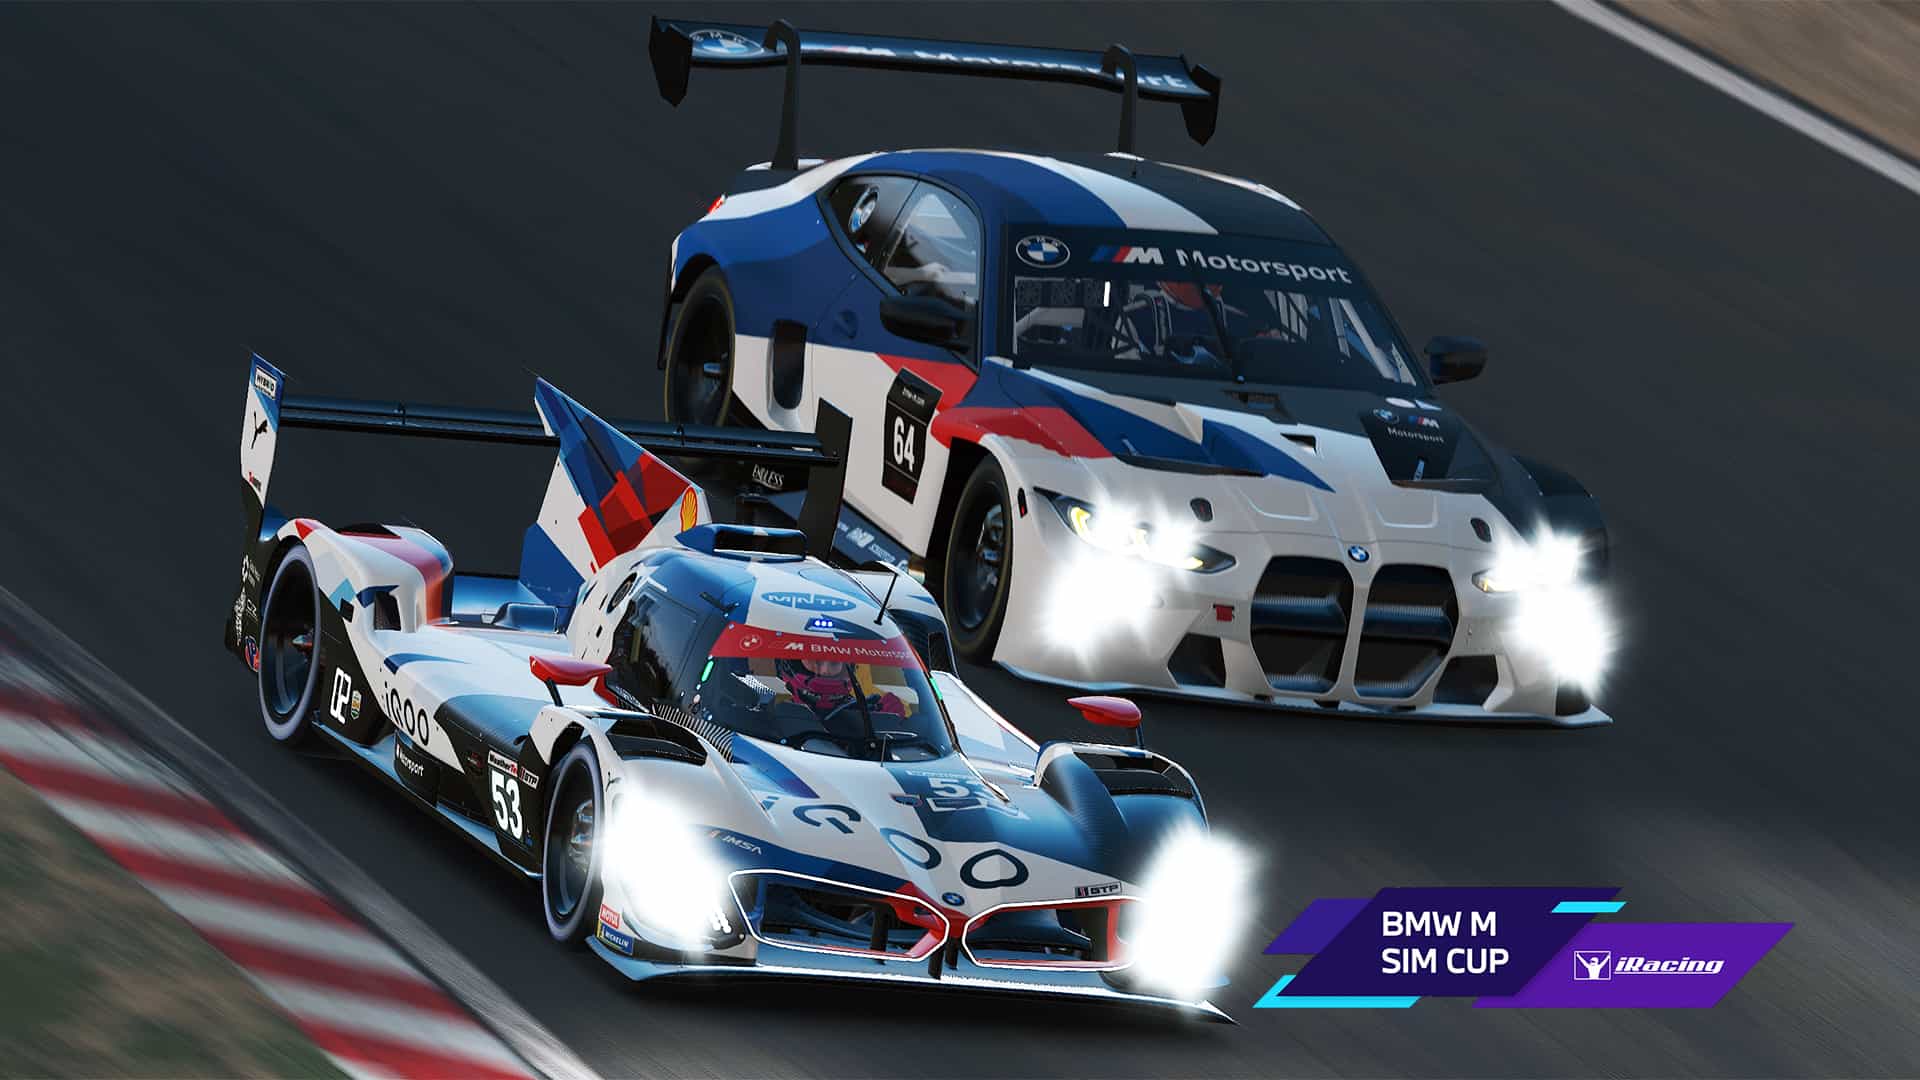 BMW M SIM Cup returns on iRacing in 2023 with more than $45,000 up